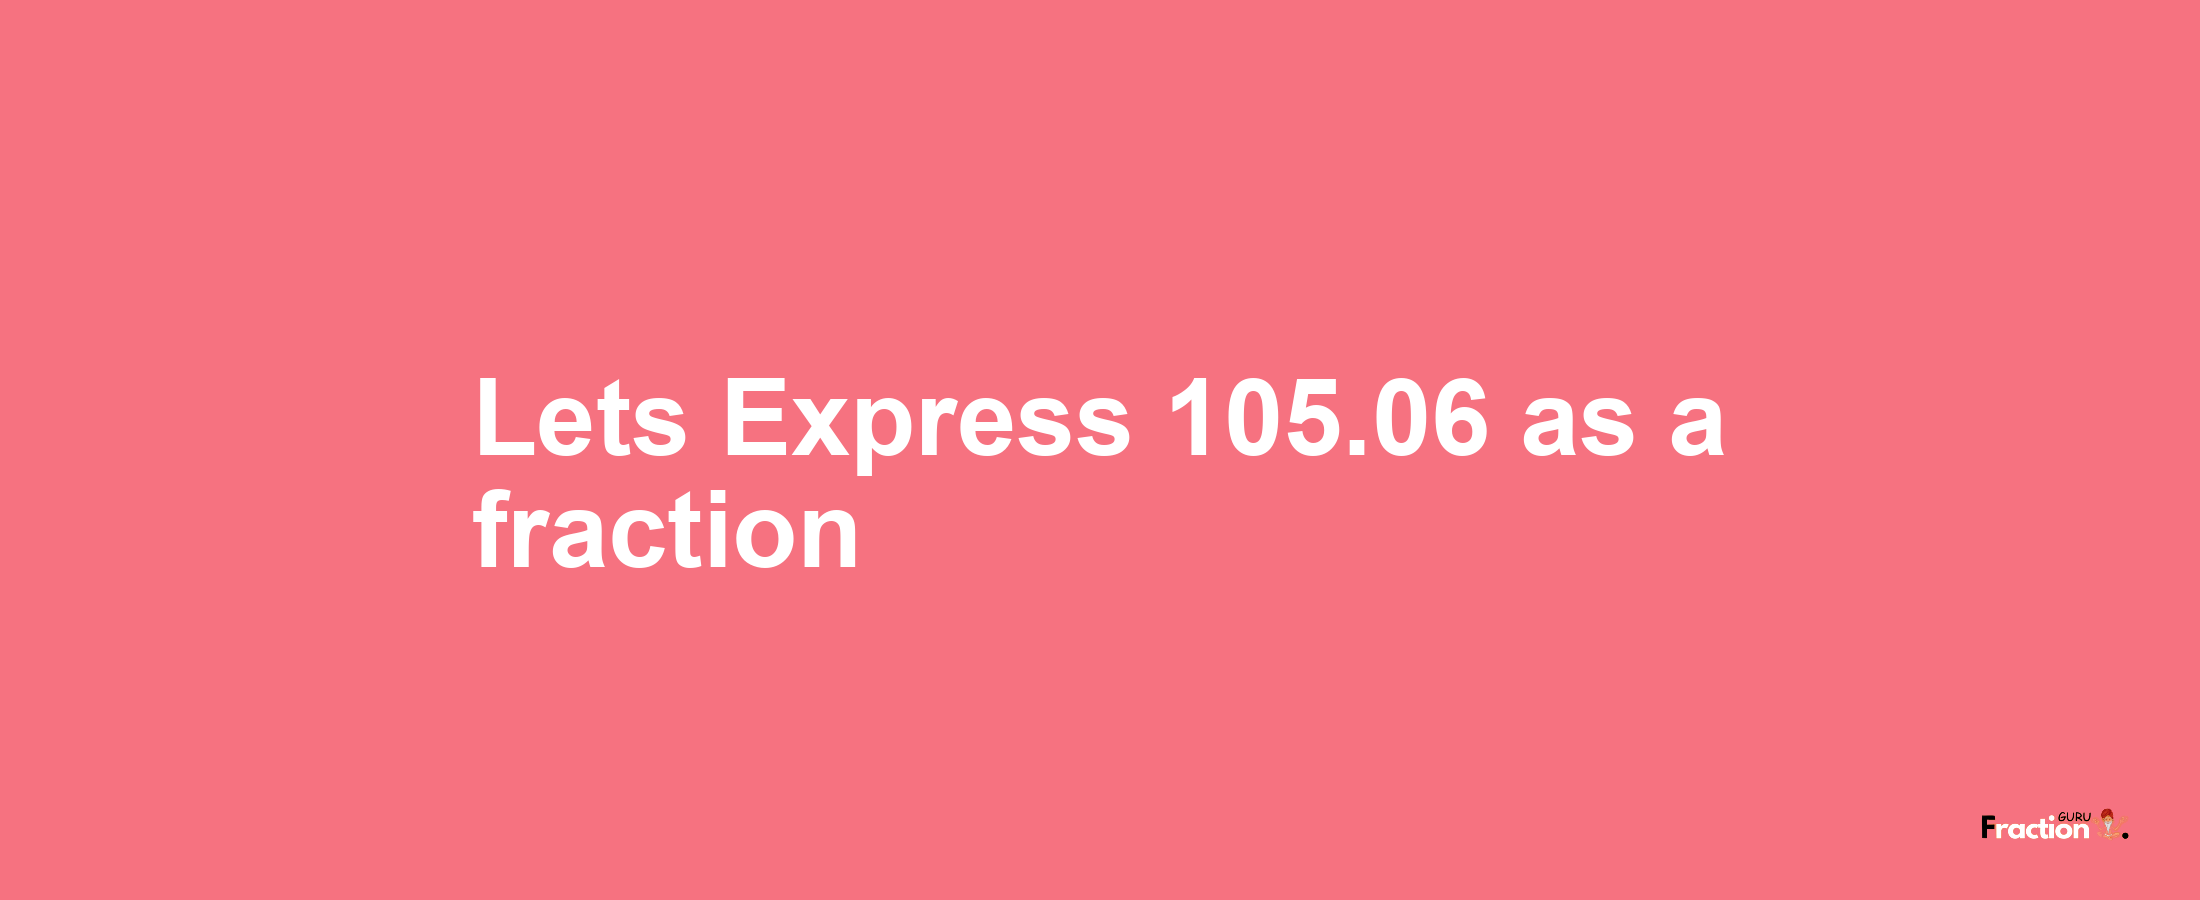 Lets Express 105.06 as afraction